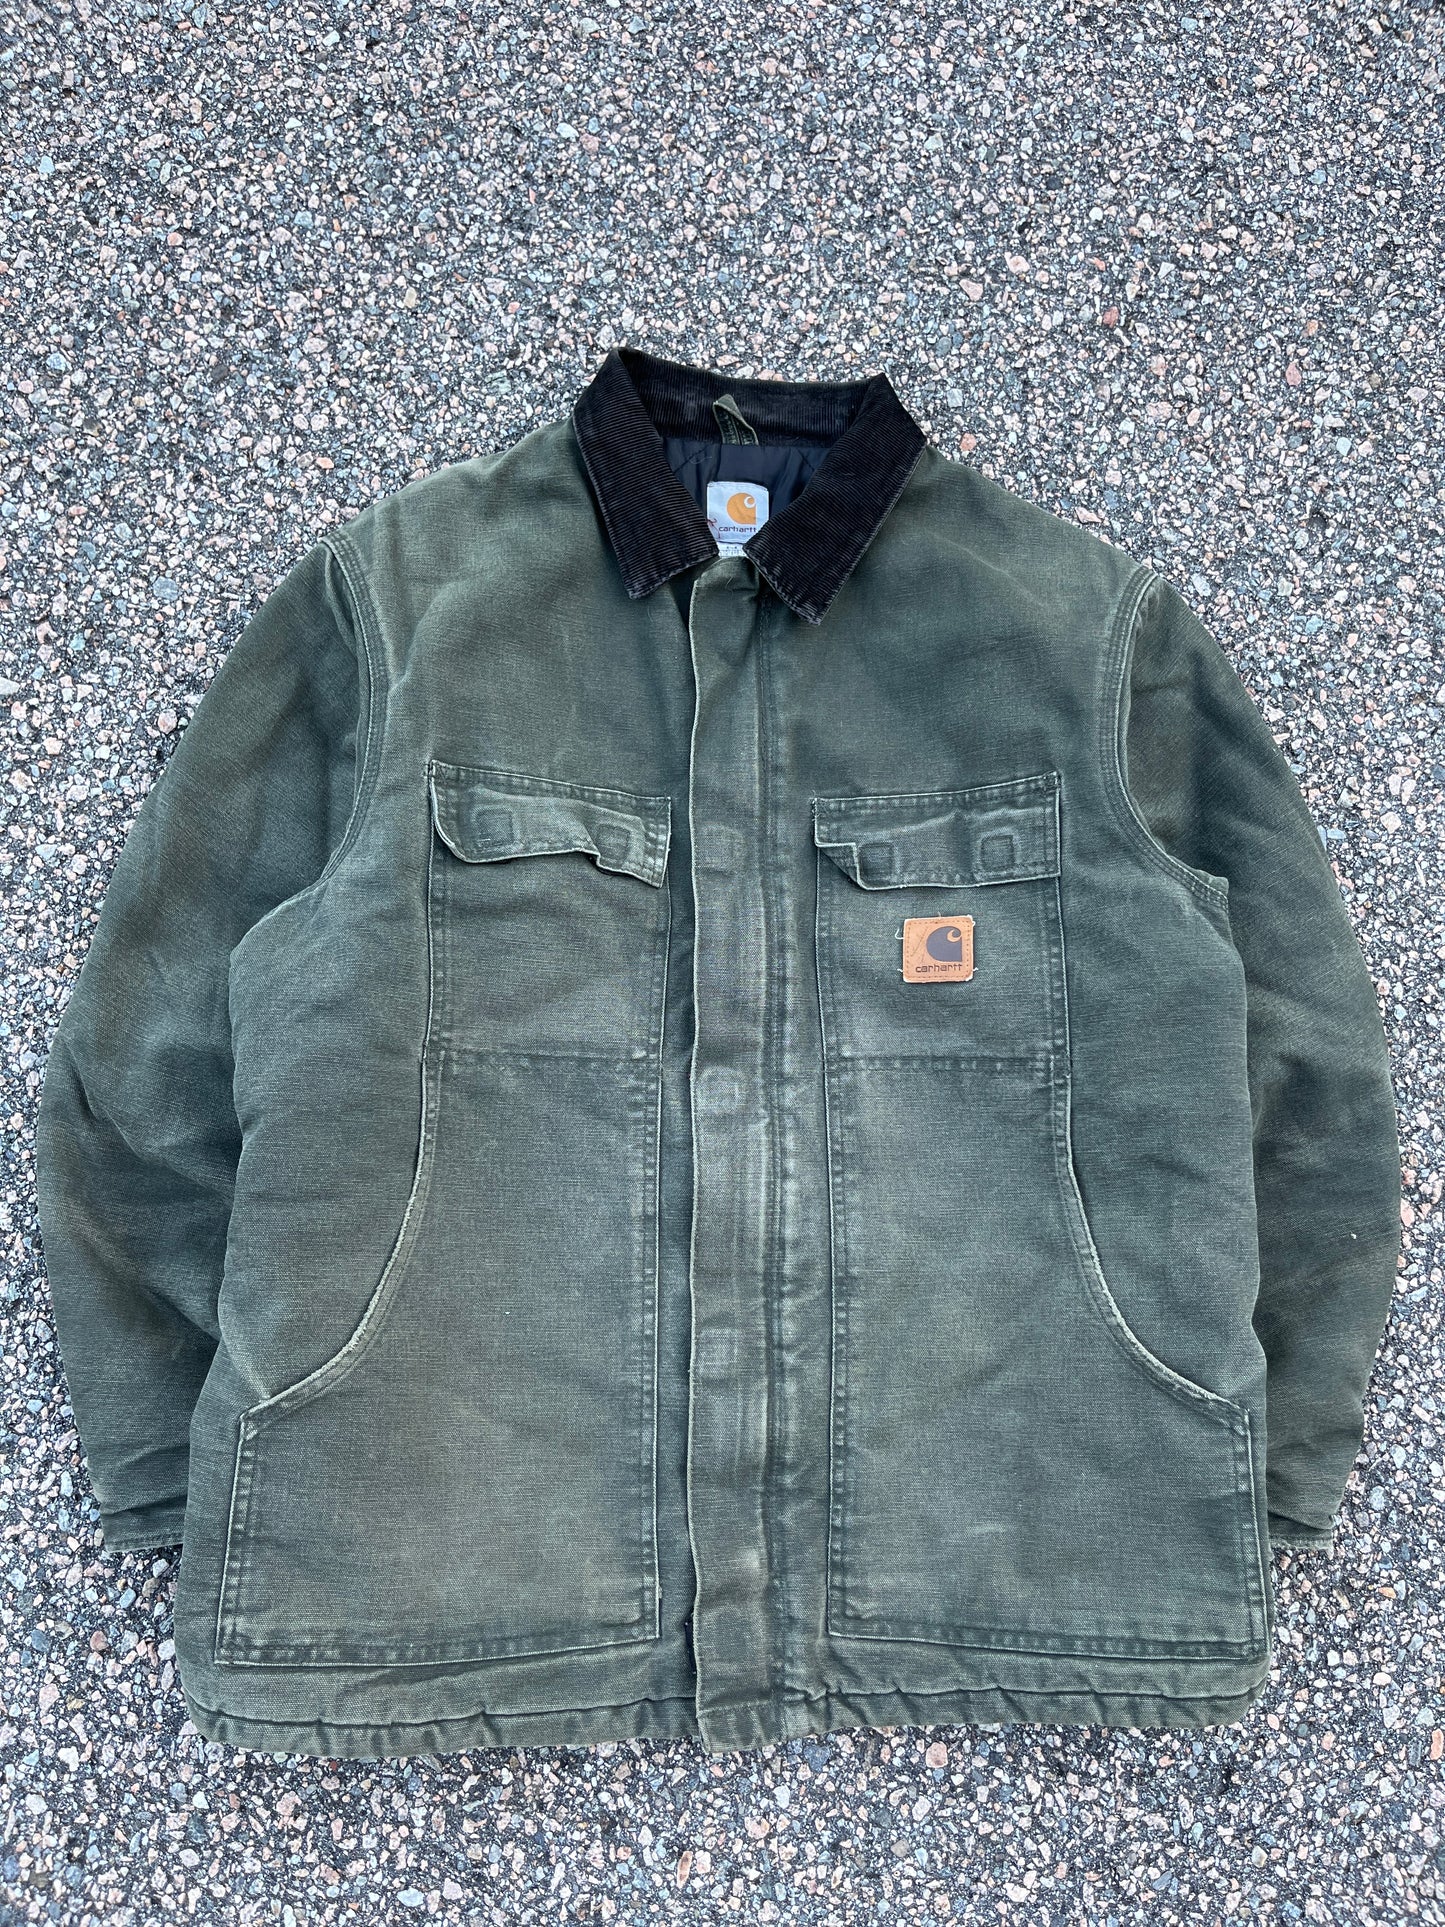 Faded Olive Green Arctic Style Carhartt Jacket - Large